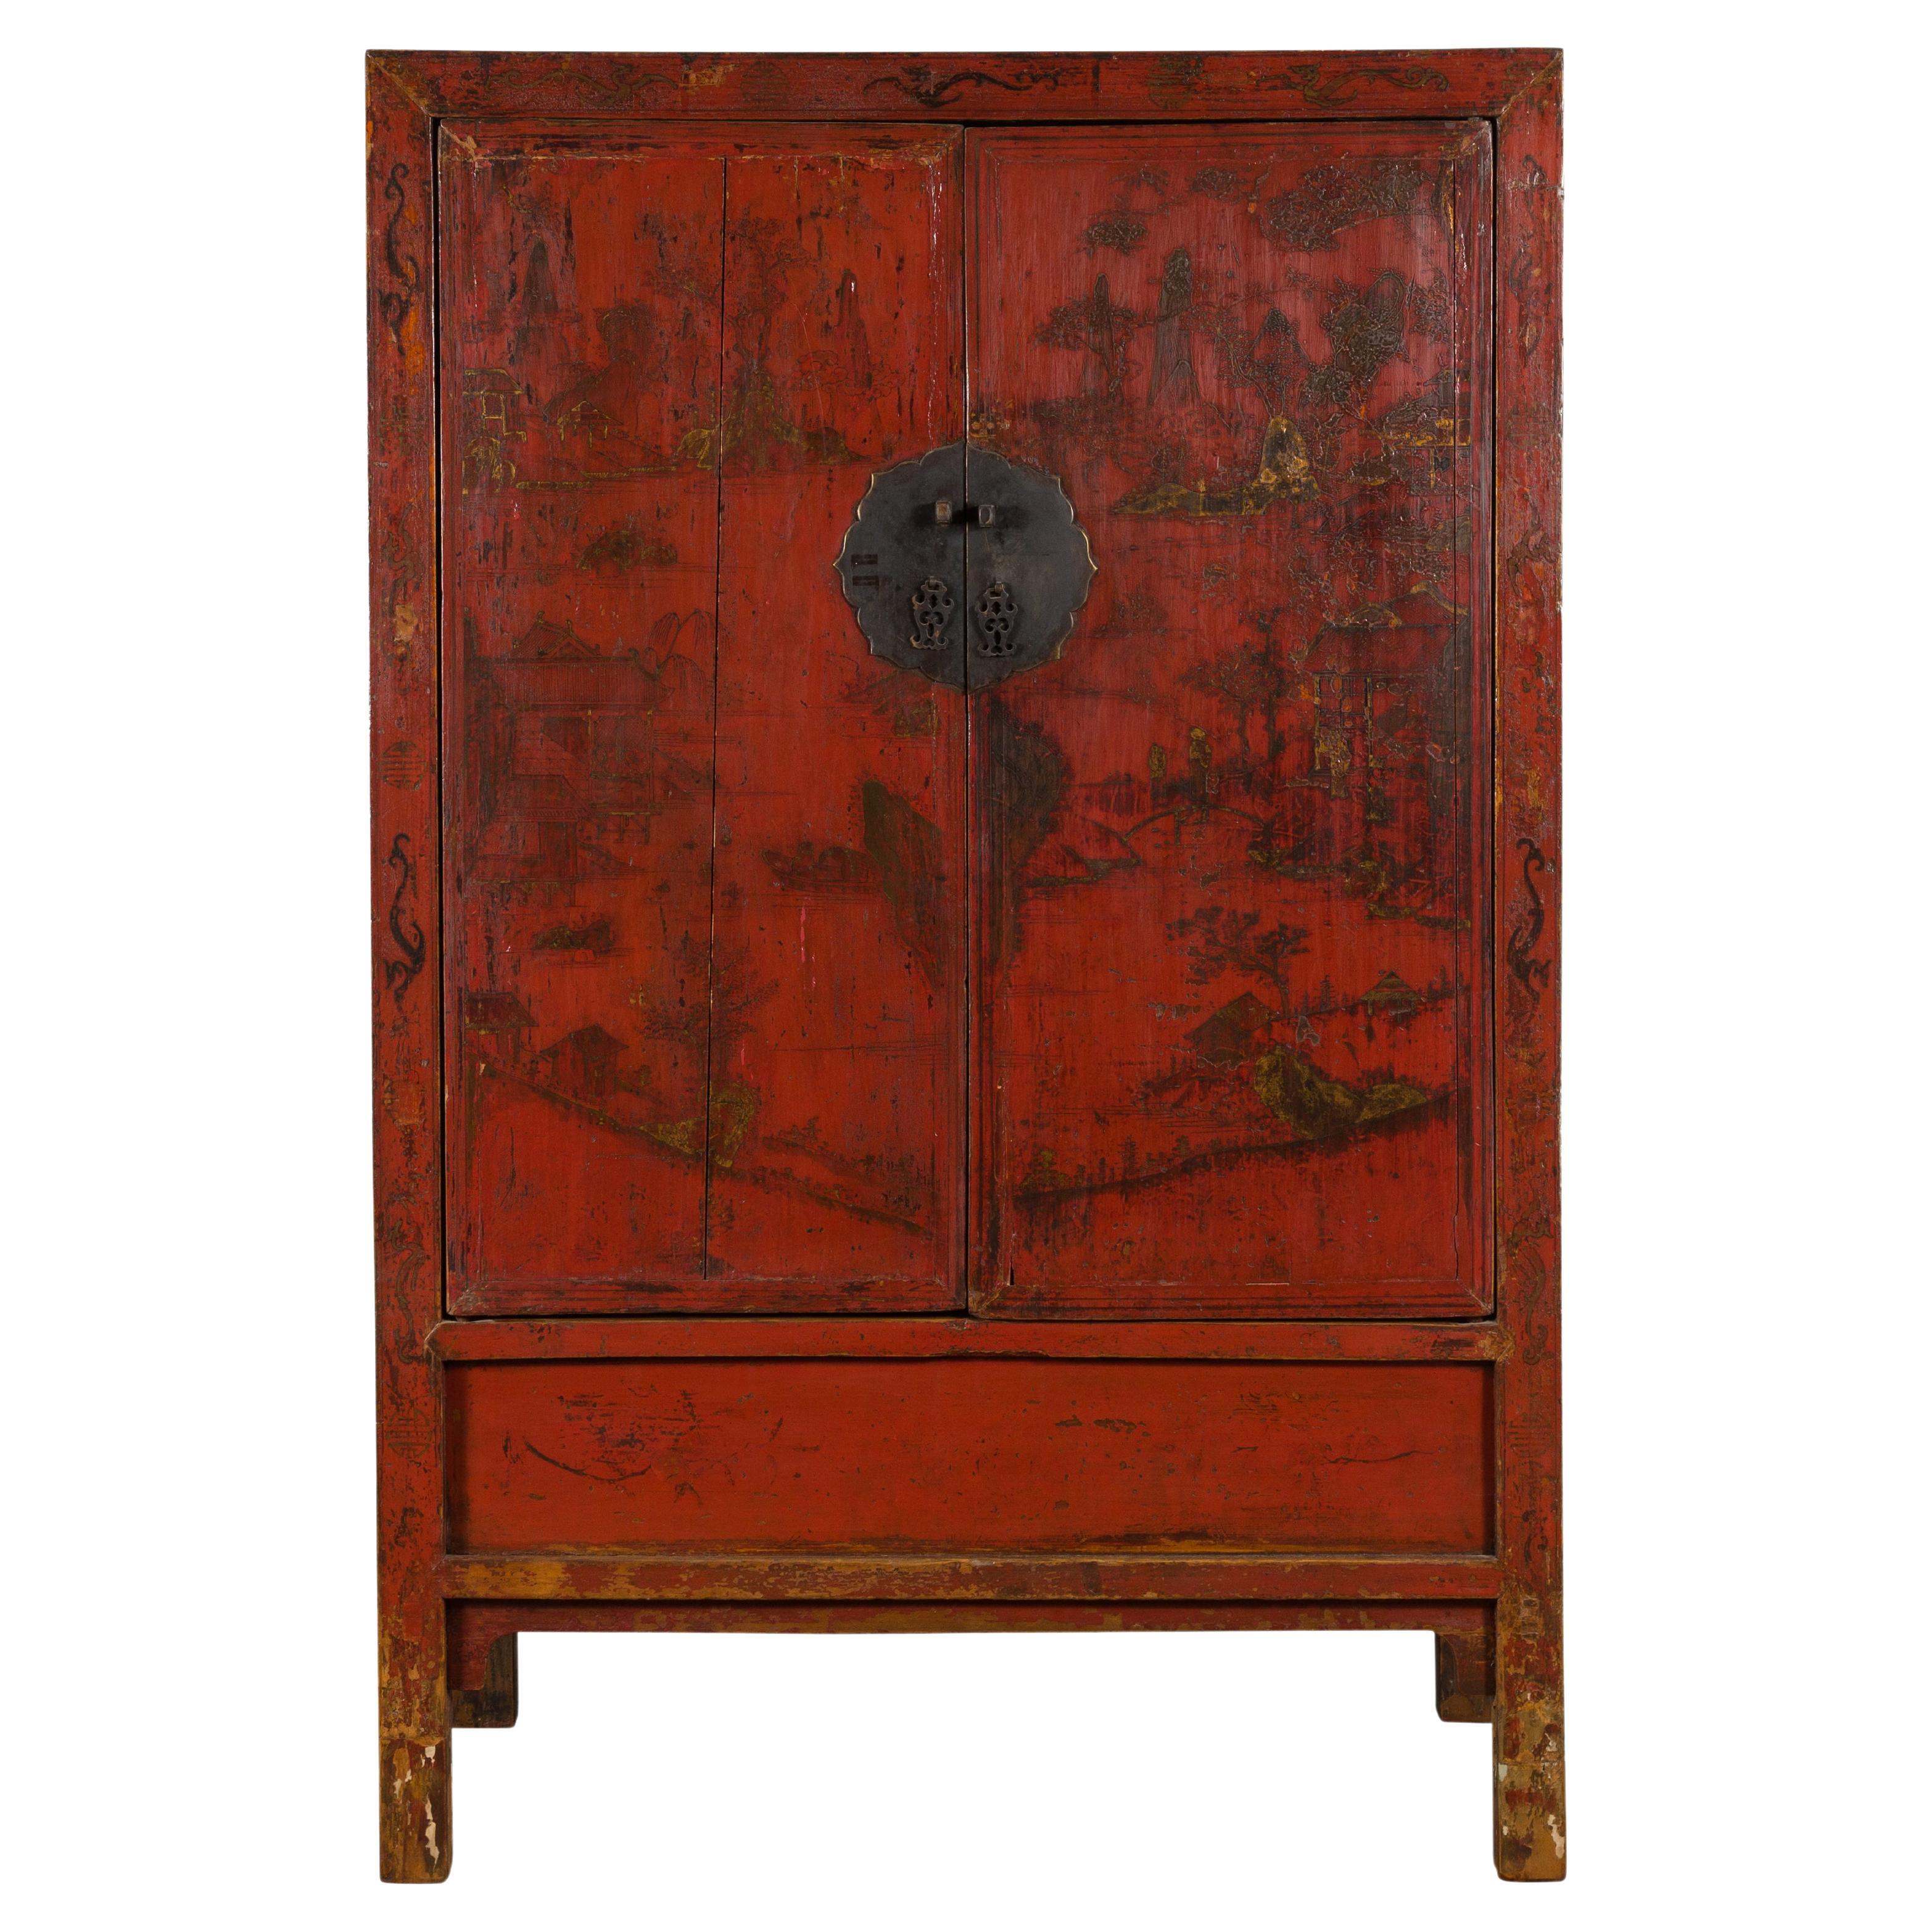 Chinese Qing Dynasty Red Lacquer Cabinet with Hand-Painted Décor